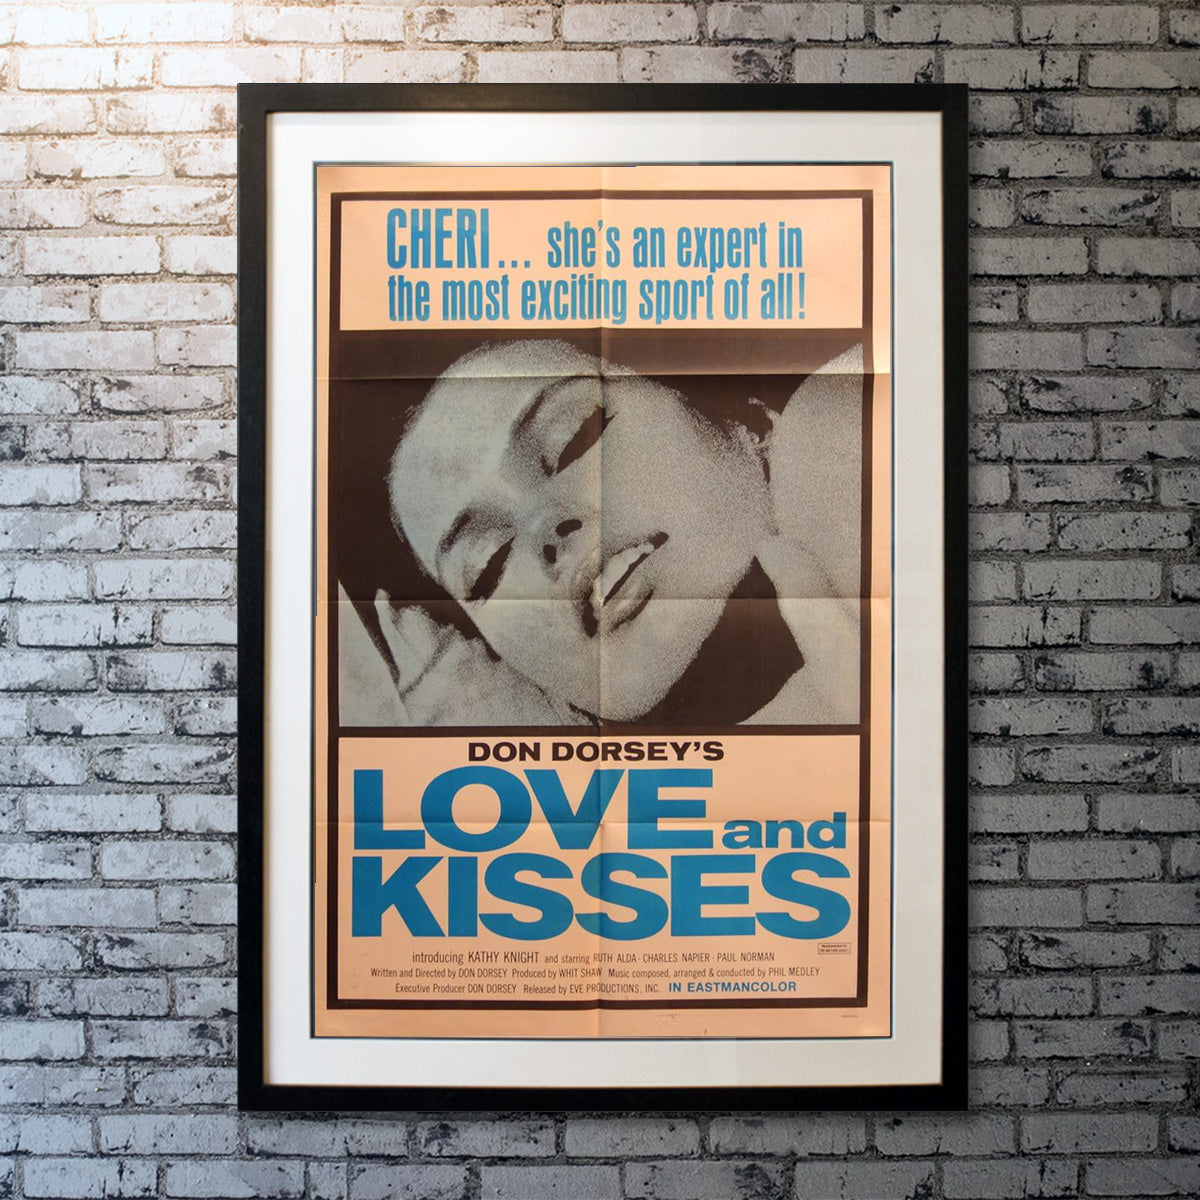 Love and Kisses (1970)